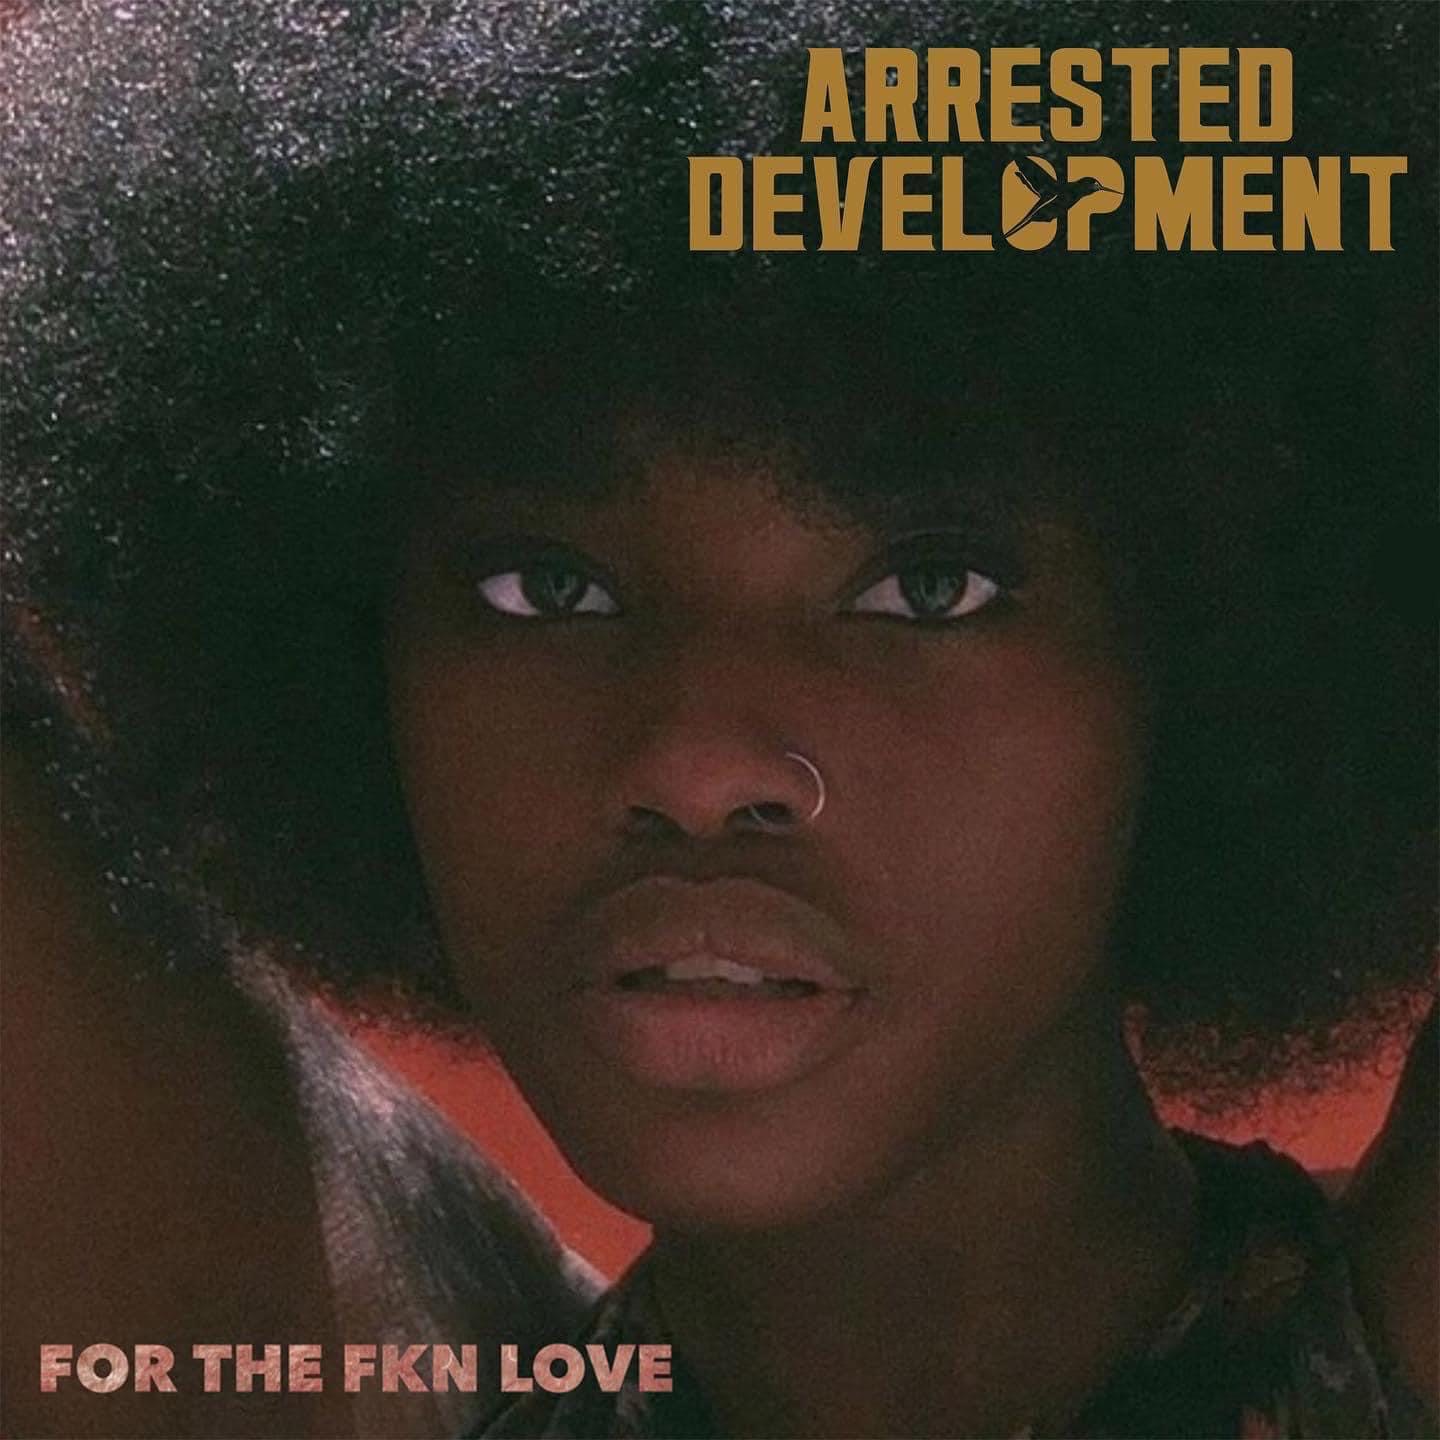 audio review : For The Fkn love ( album ) ... Arrested Development